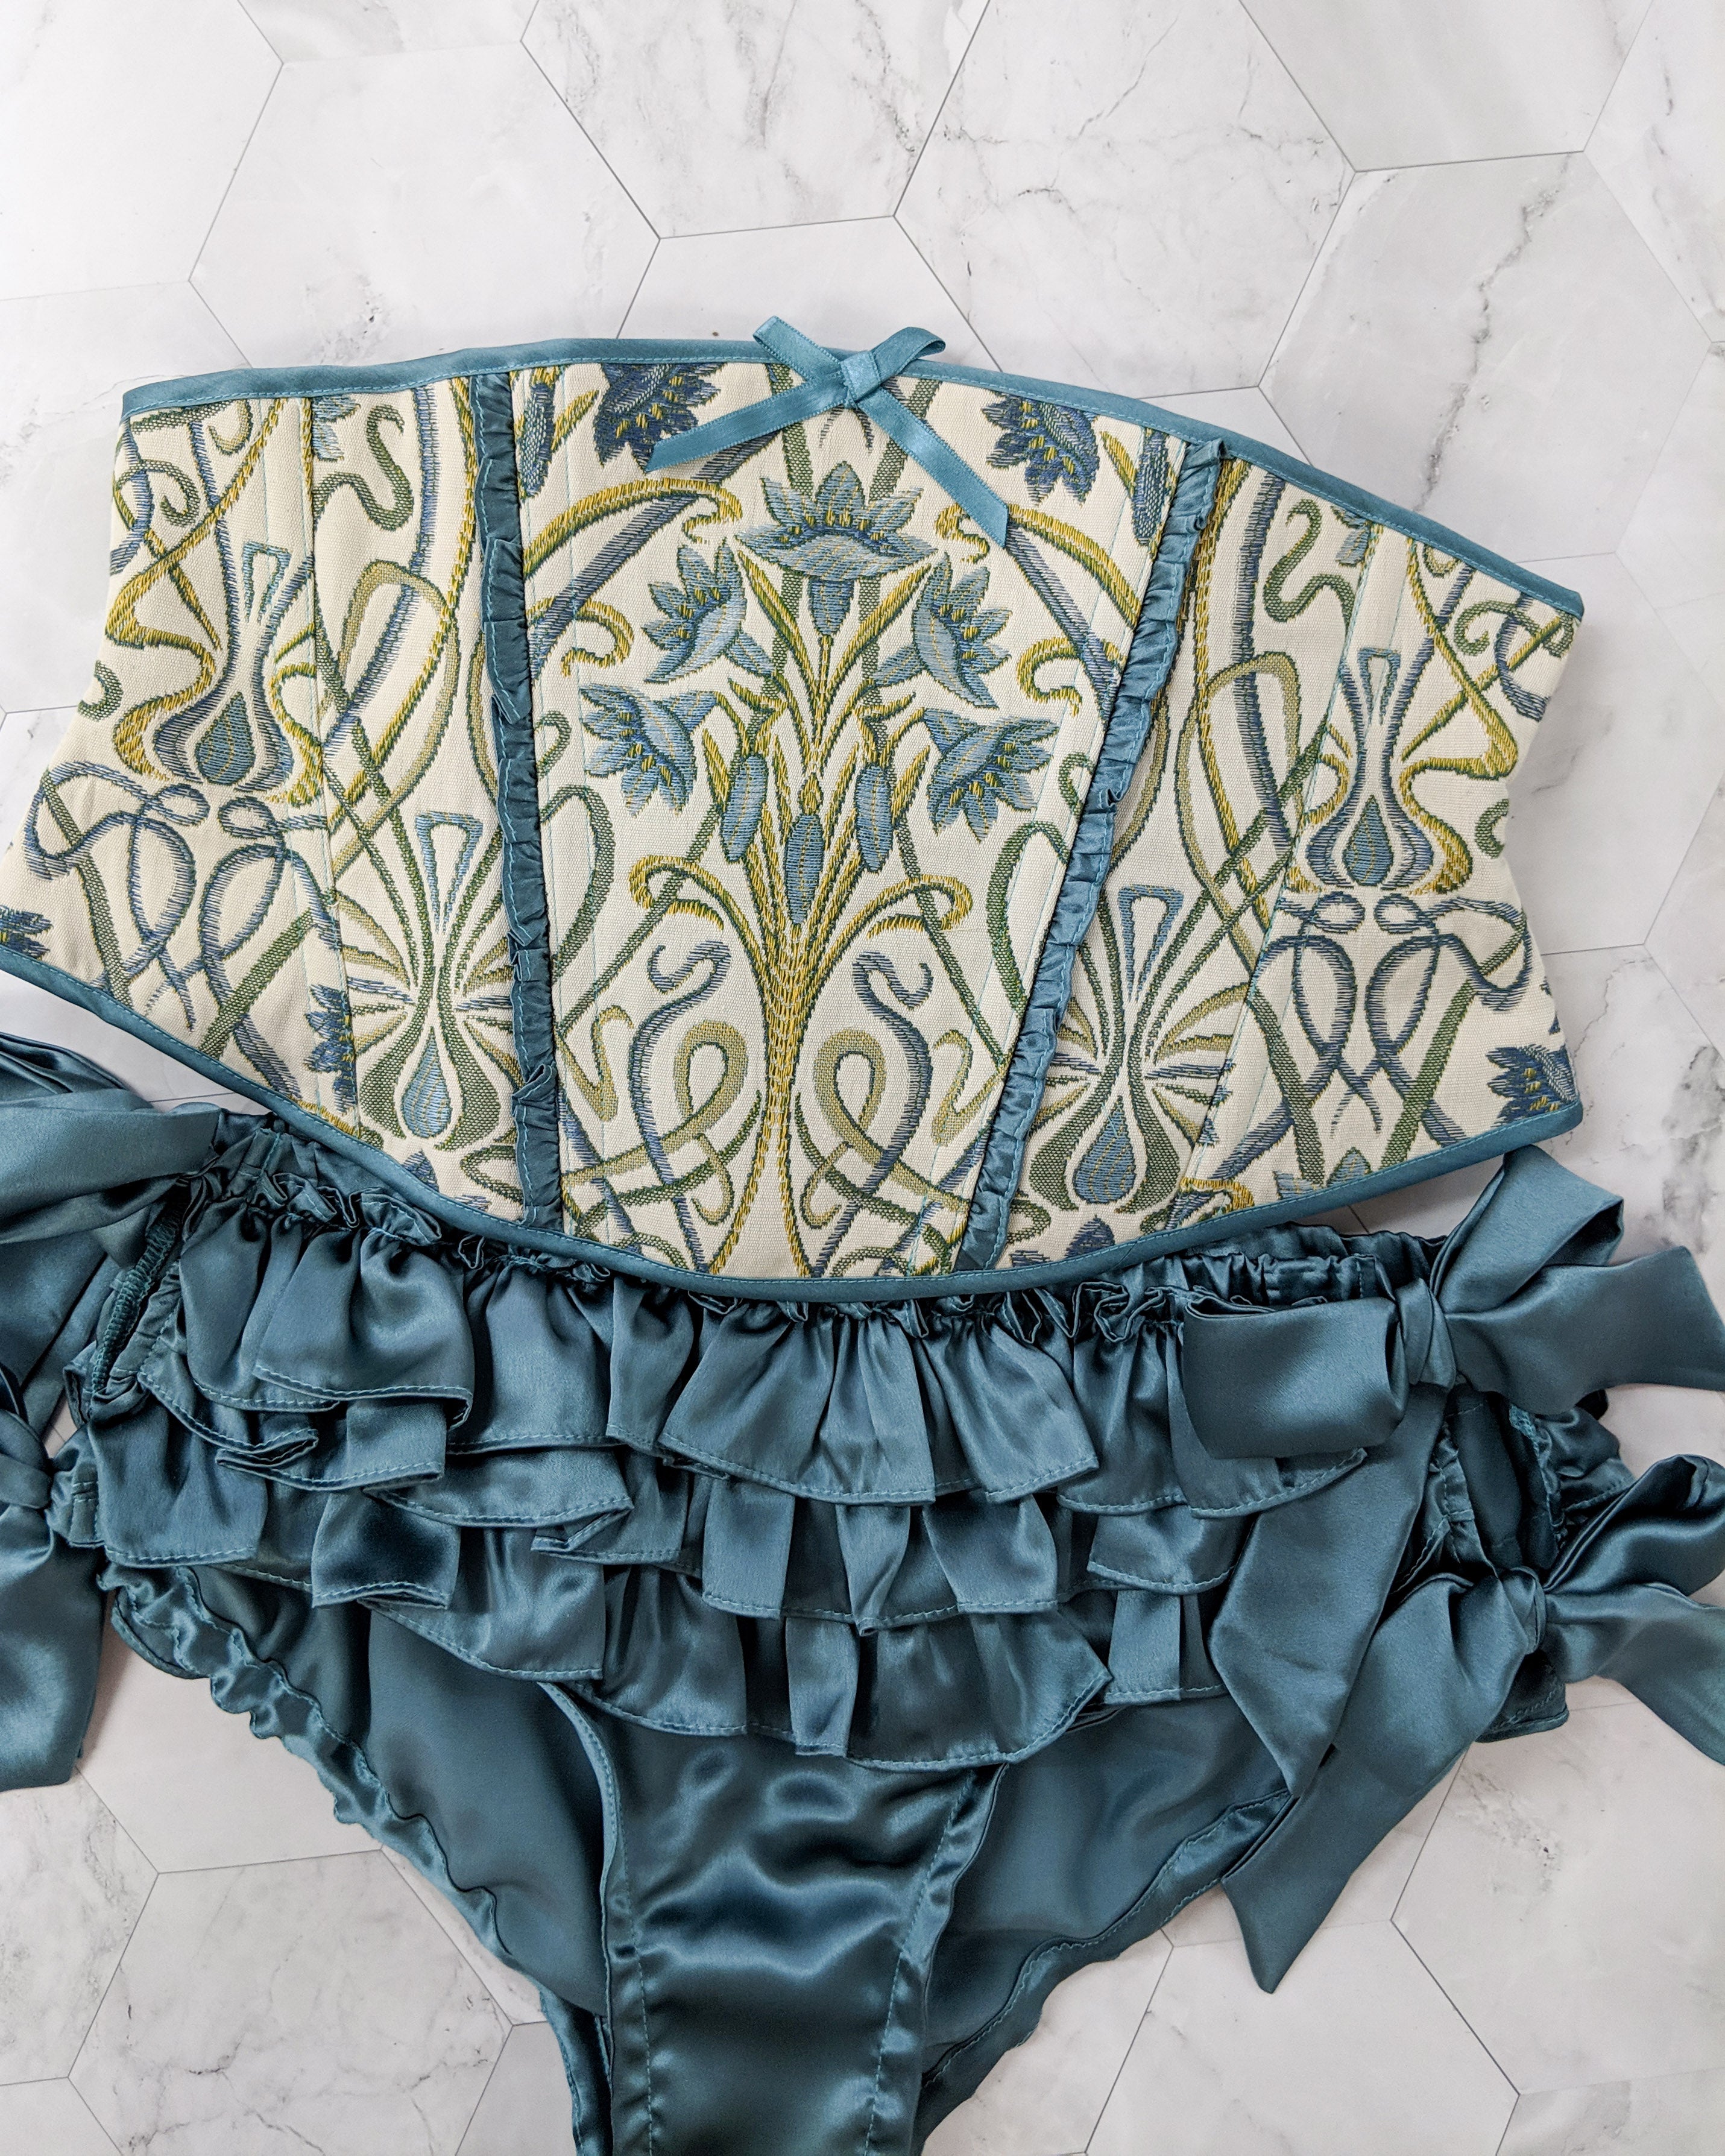 Designer intimates collection with handmade silk ruffled panties and a brocade waspie corset